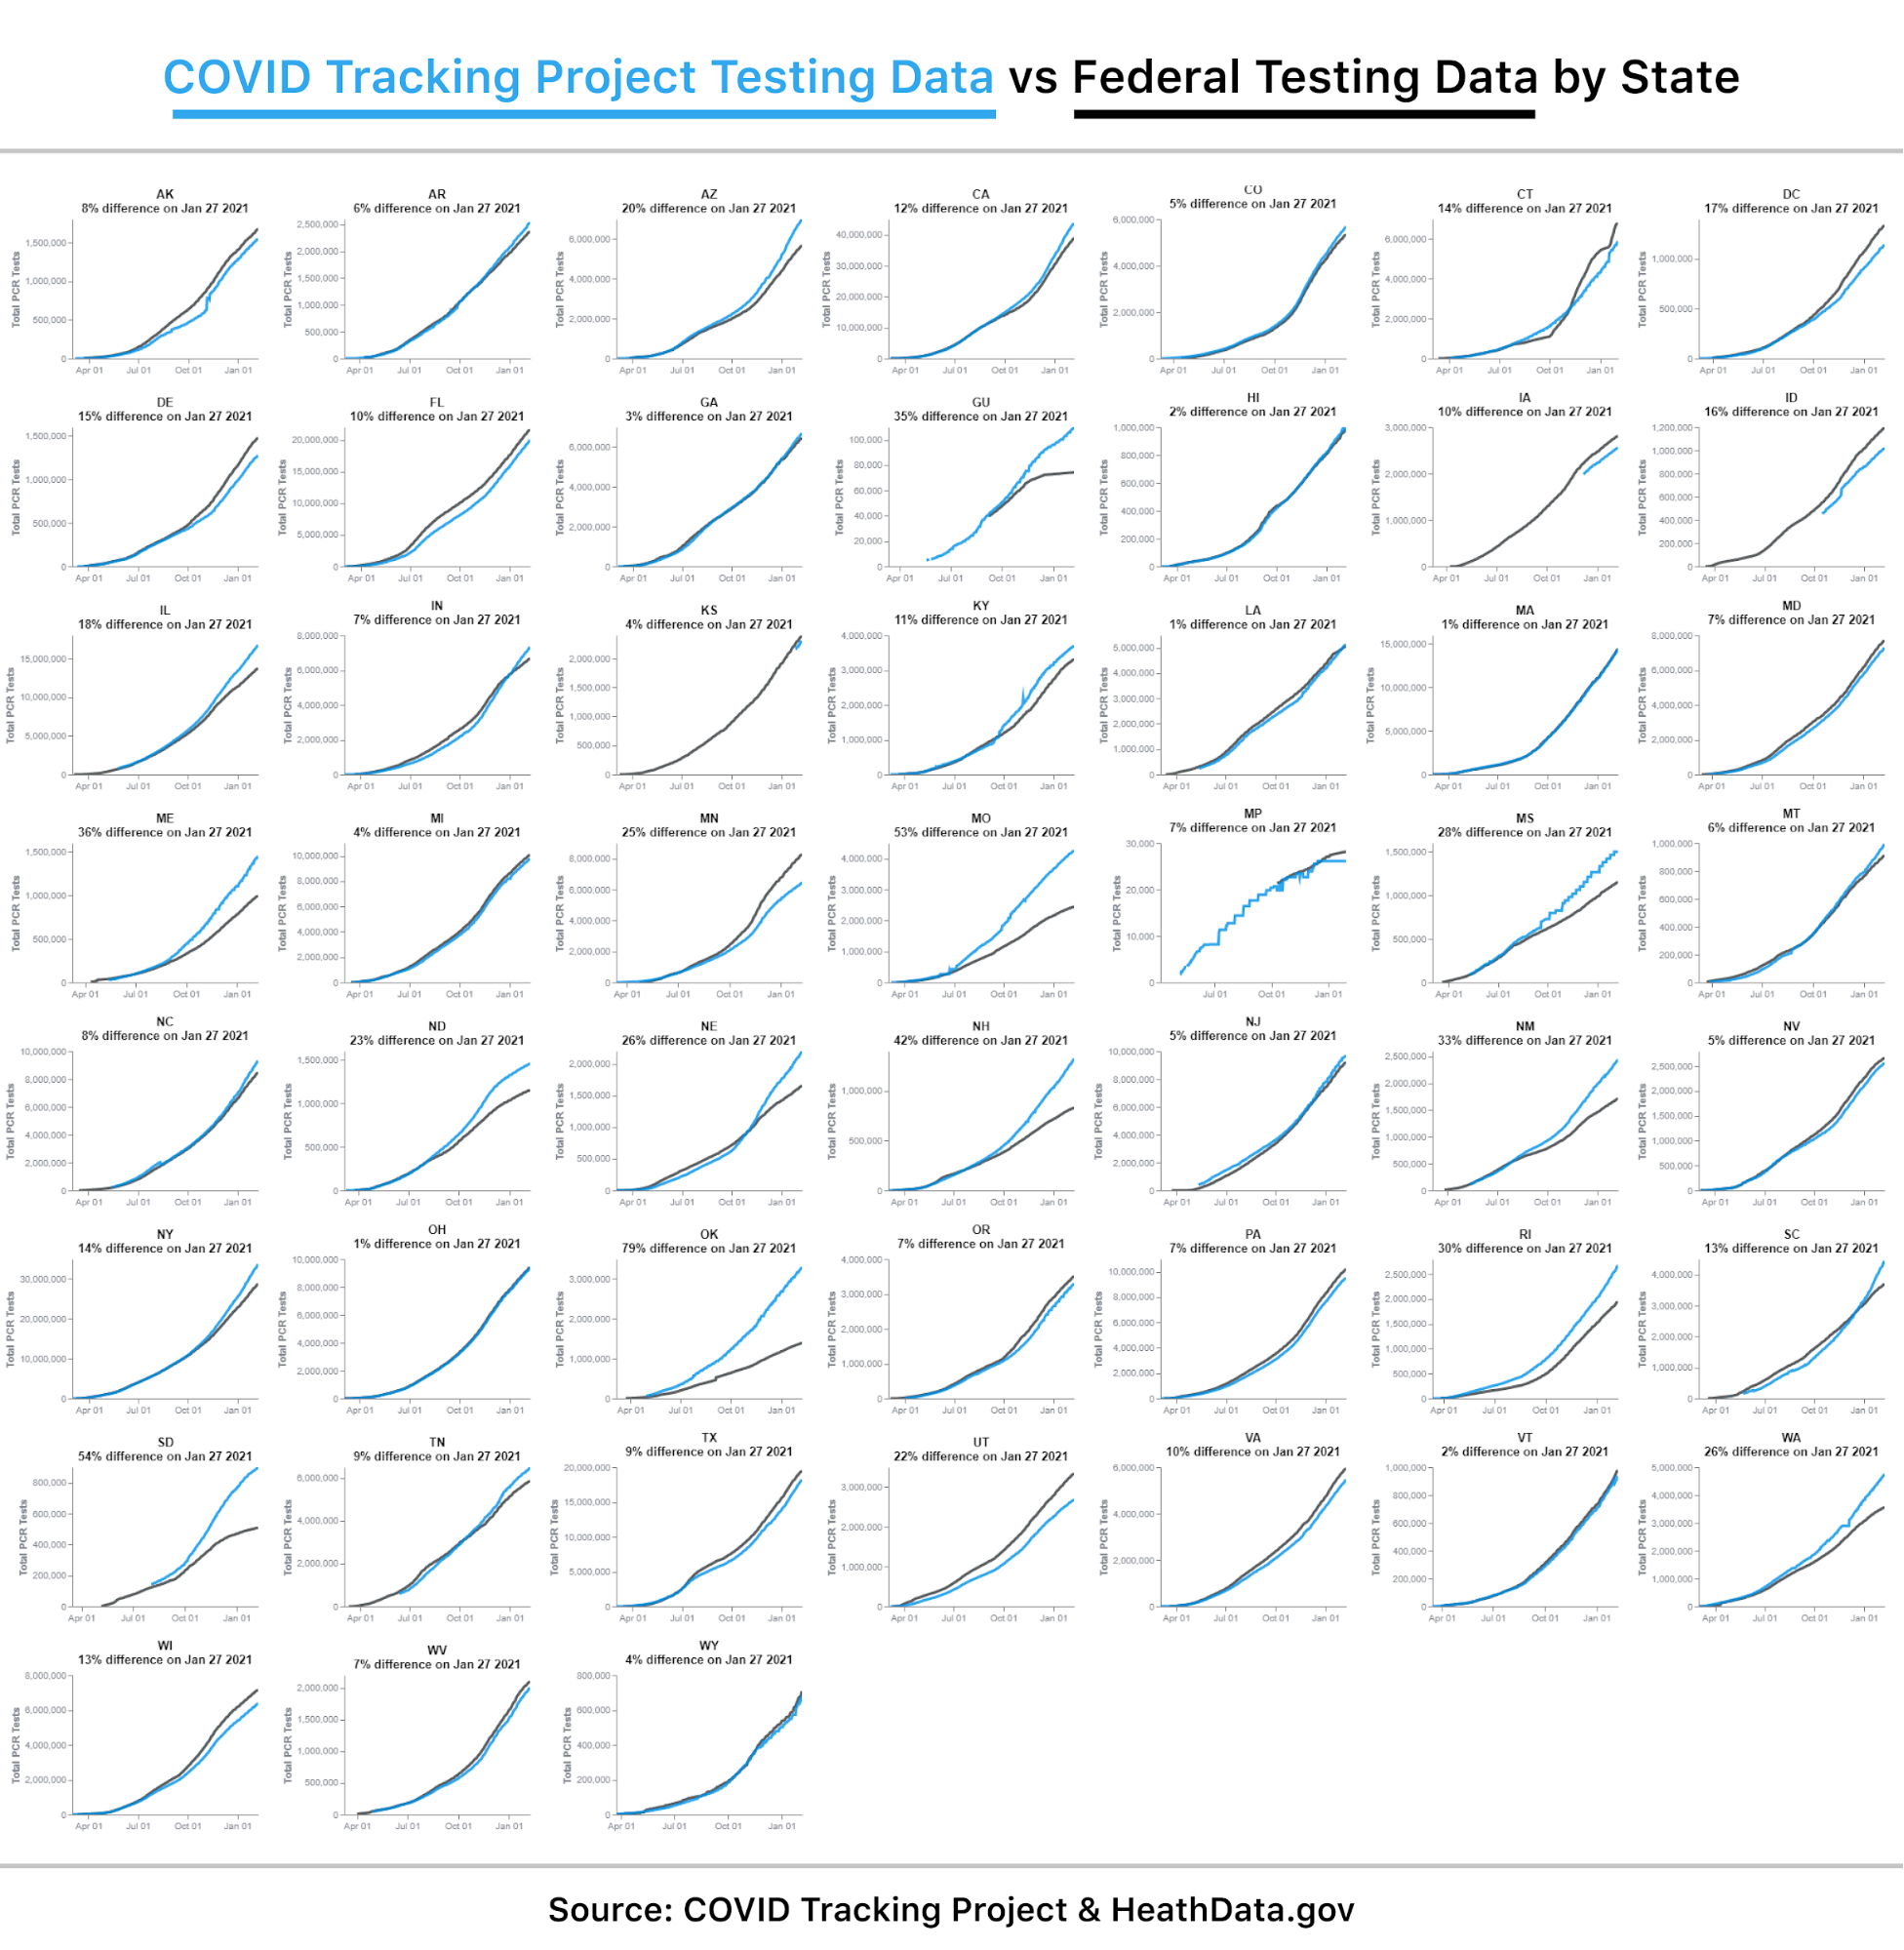 Canvas of each state's cumulative federal testing data alongside COVID Tracking Project testing data. While the data aligns closely throughout the whole timeseries in some states, many states' curves only align at the beginning of the timeseries, eventually exhibiting widening discrepancies between state and federal data. At the top of each state's plot, the title lists each state's percentage difference between state and federal totals on January 29, 2021. These percentage differences are available for download in text form at the link shared in the caption.